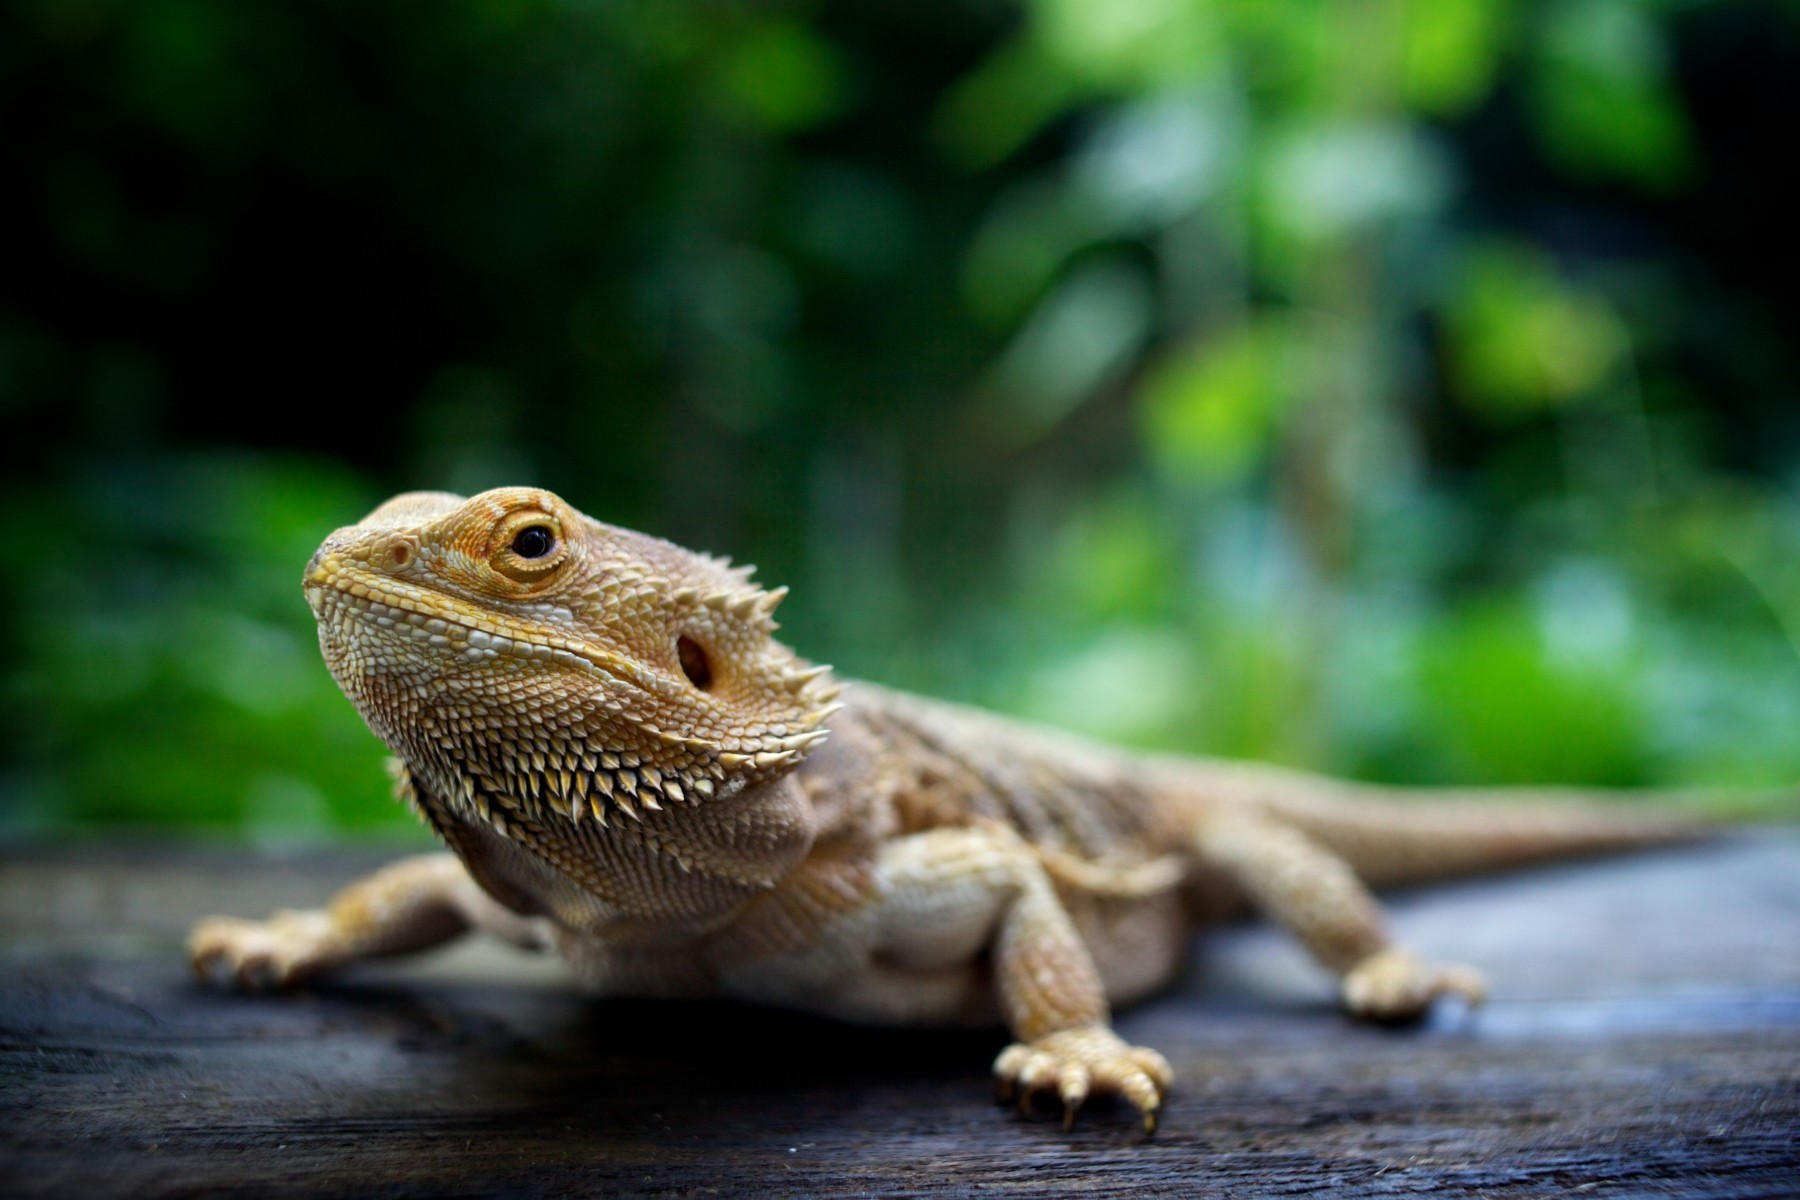 How To Tell If Bearded Dragon Is Male Or Female